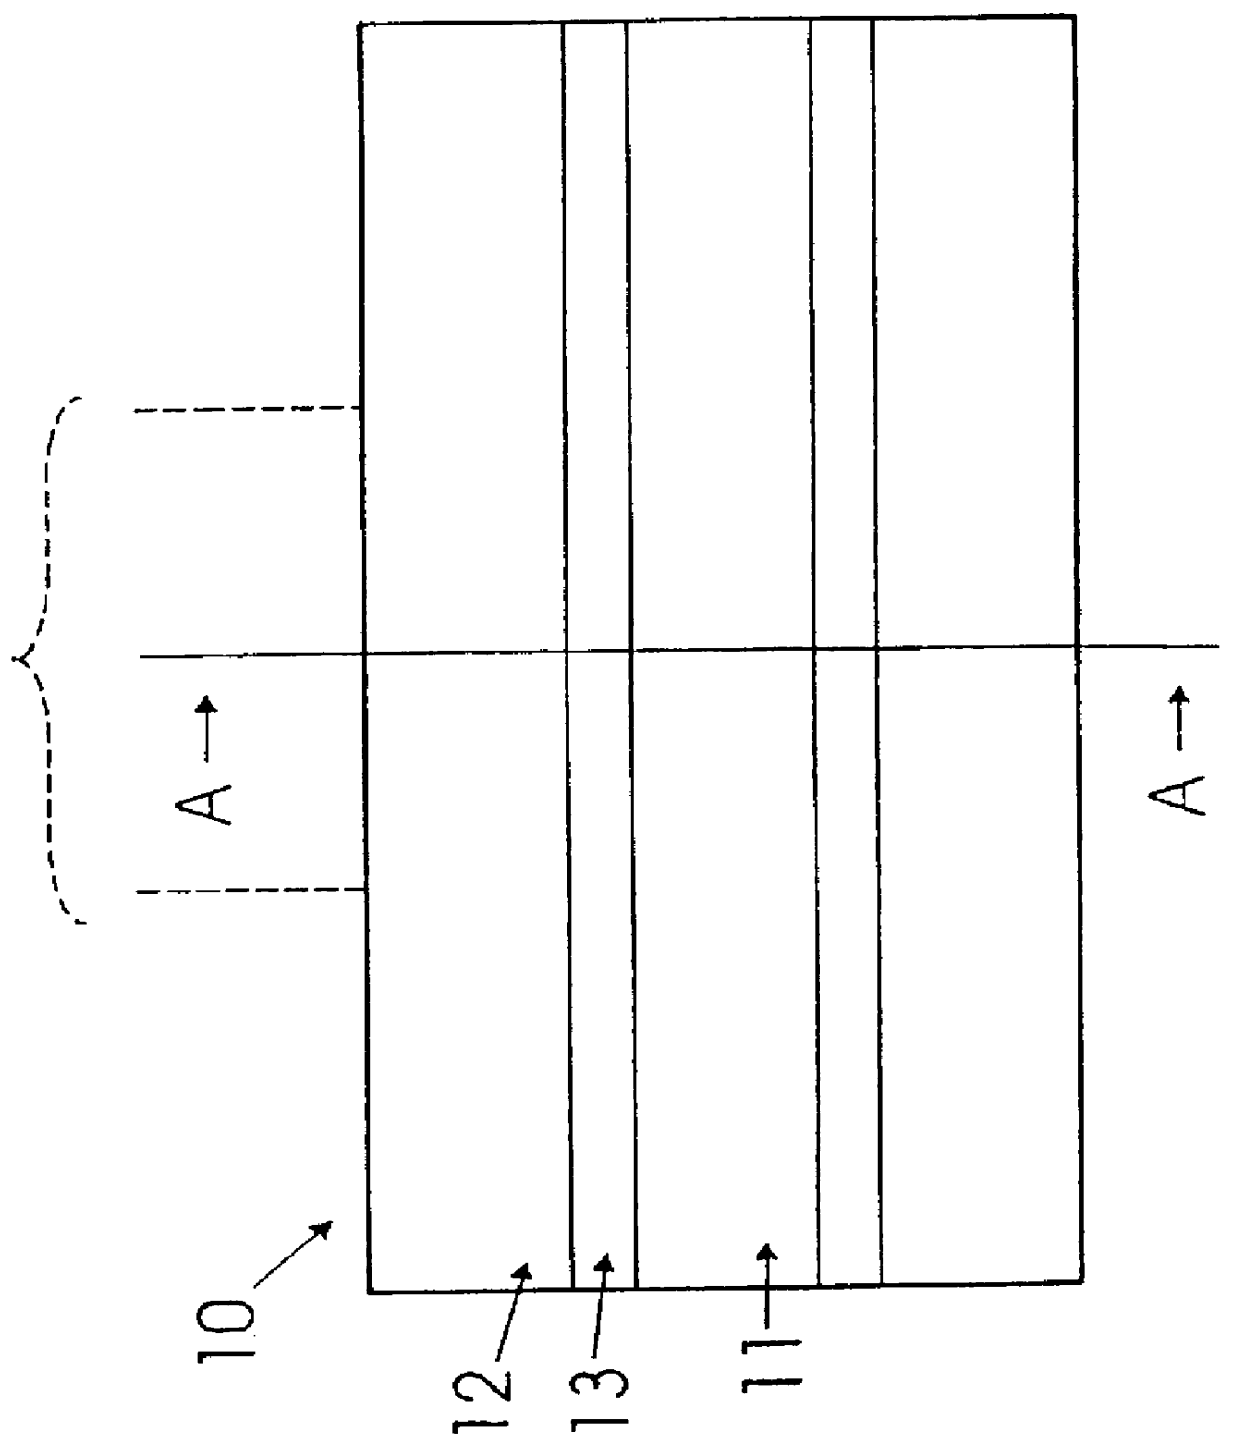 Polarisation asymmetric active optical waveguide, method of its production, and its uses